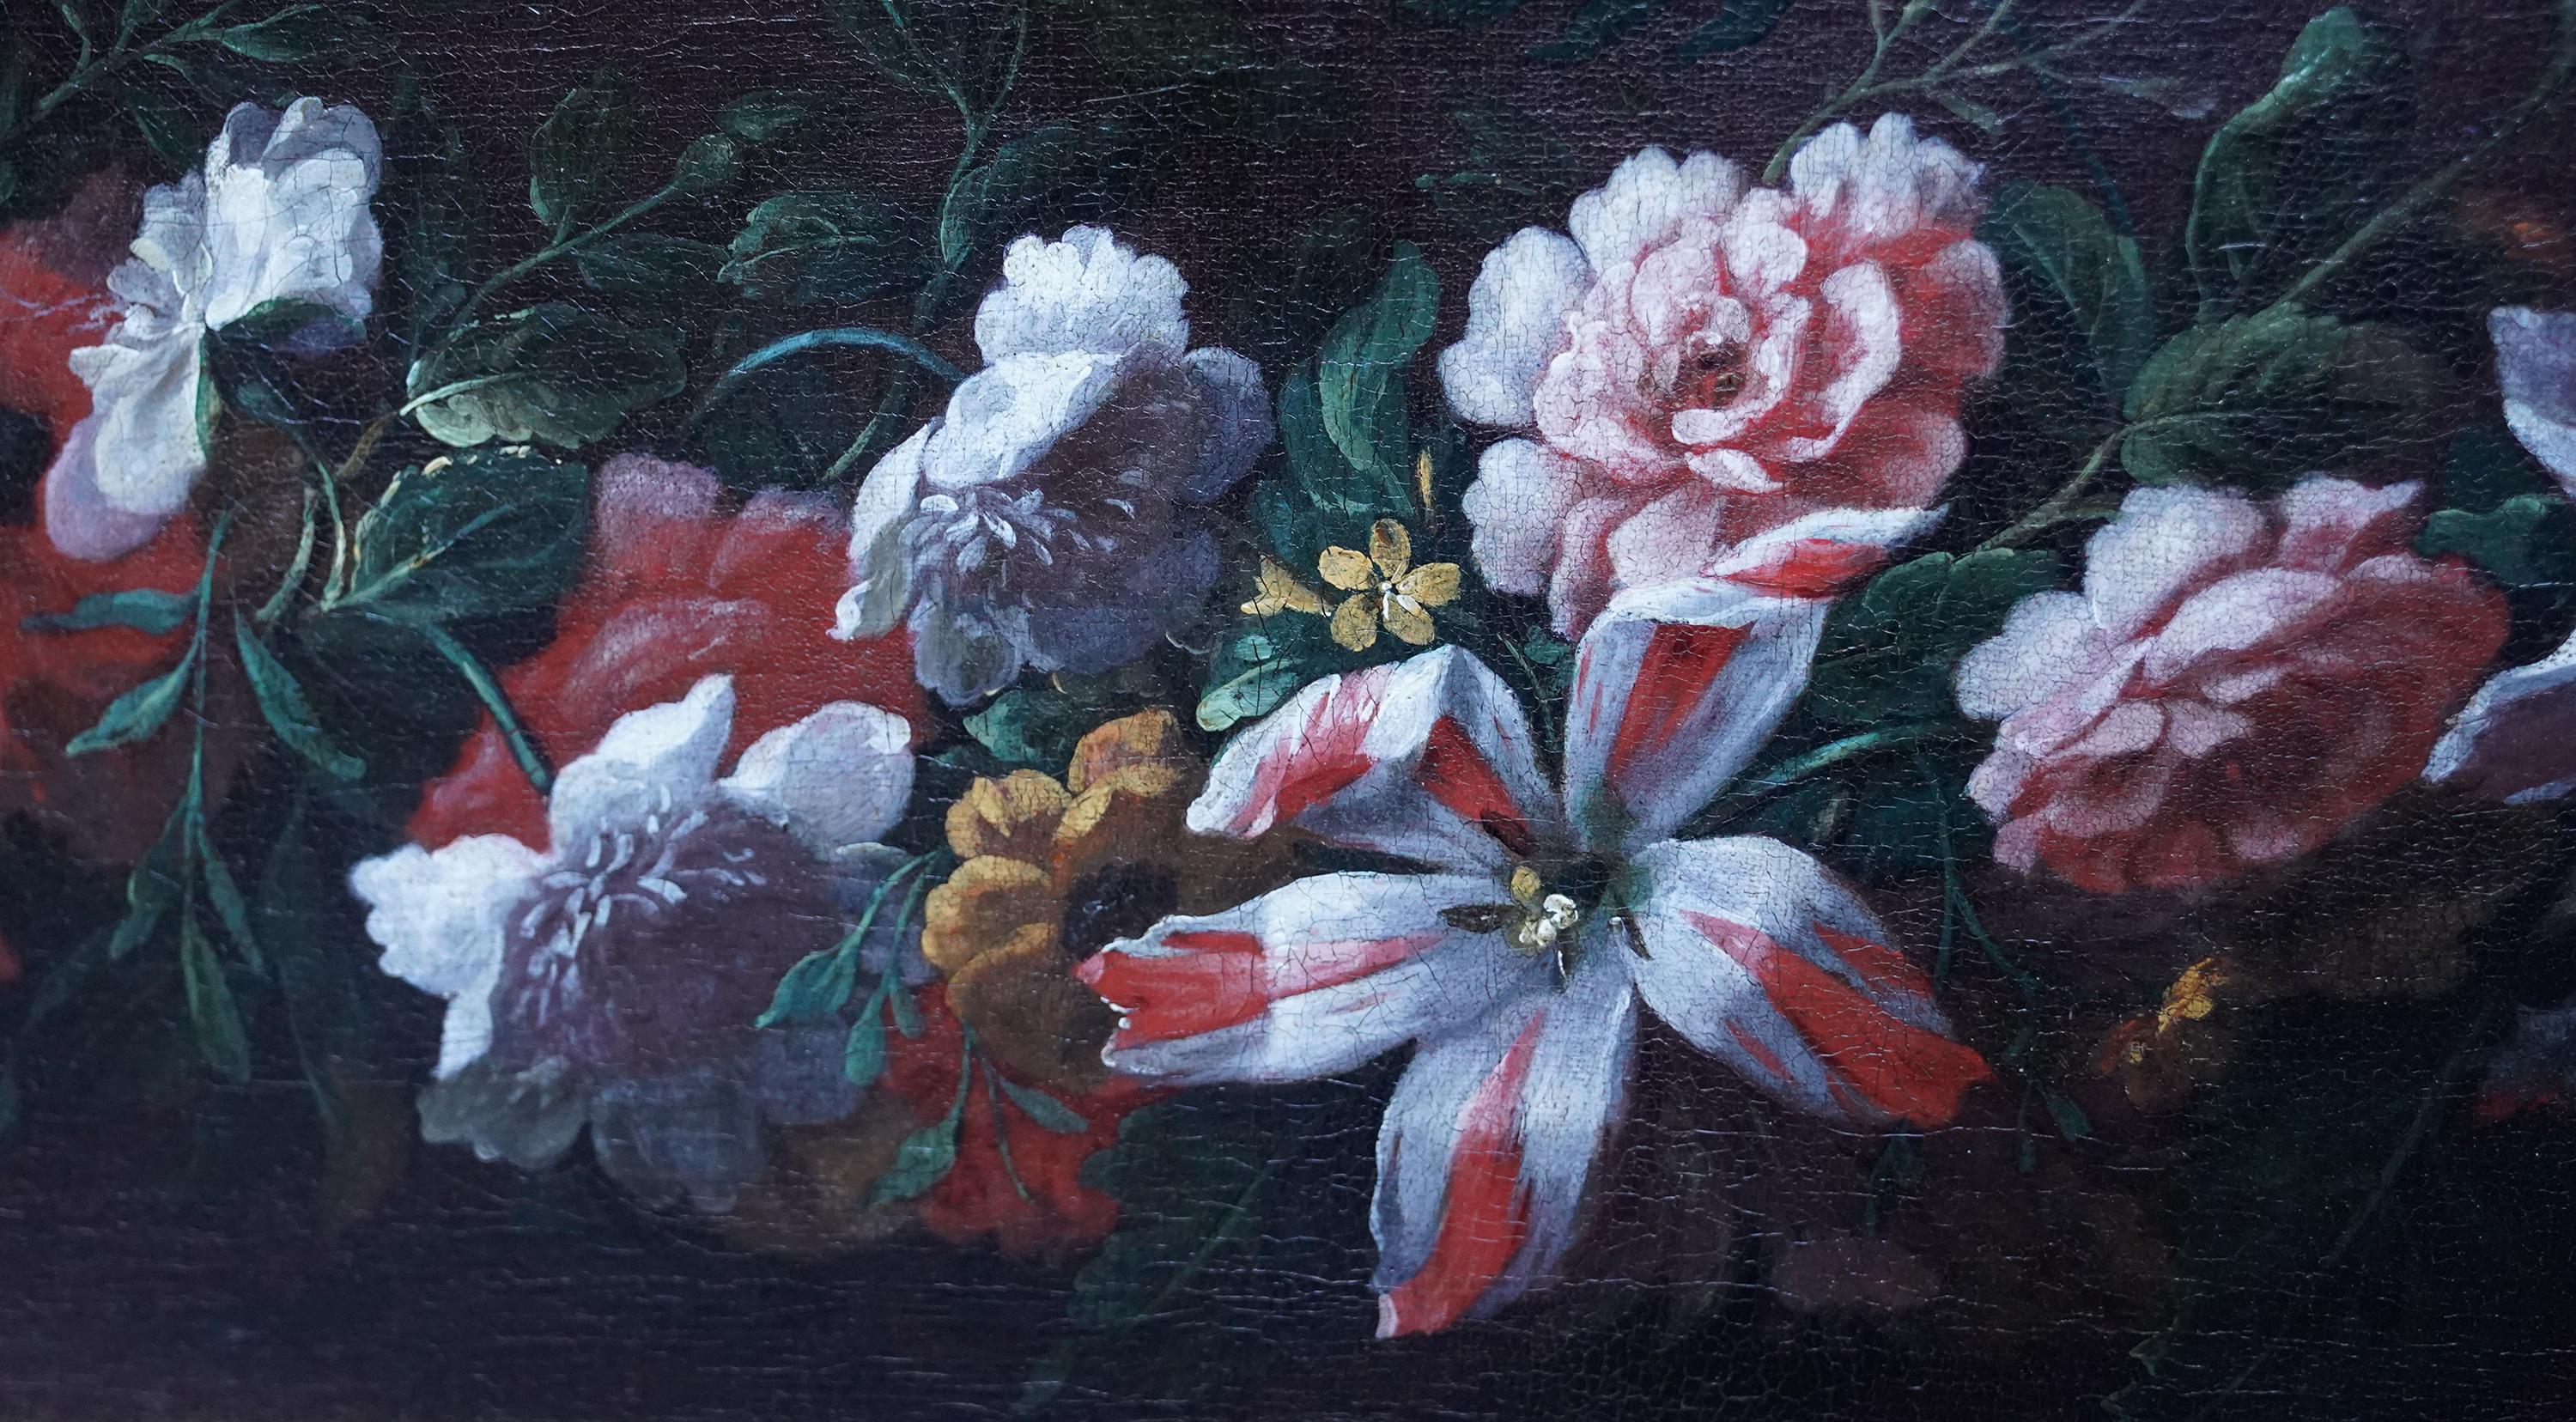 This superb 18th century Old Master floral still life oil painting is attributed to Flemish artist Pieter Casteels III. Painted circa 1730 it is a garland or swag of flowers, something Casteels often painted to be hung above a doorway. The garland